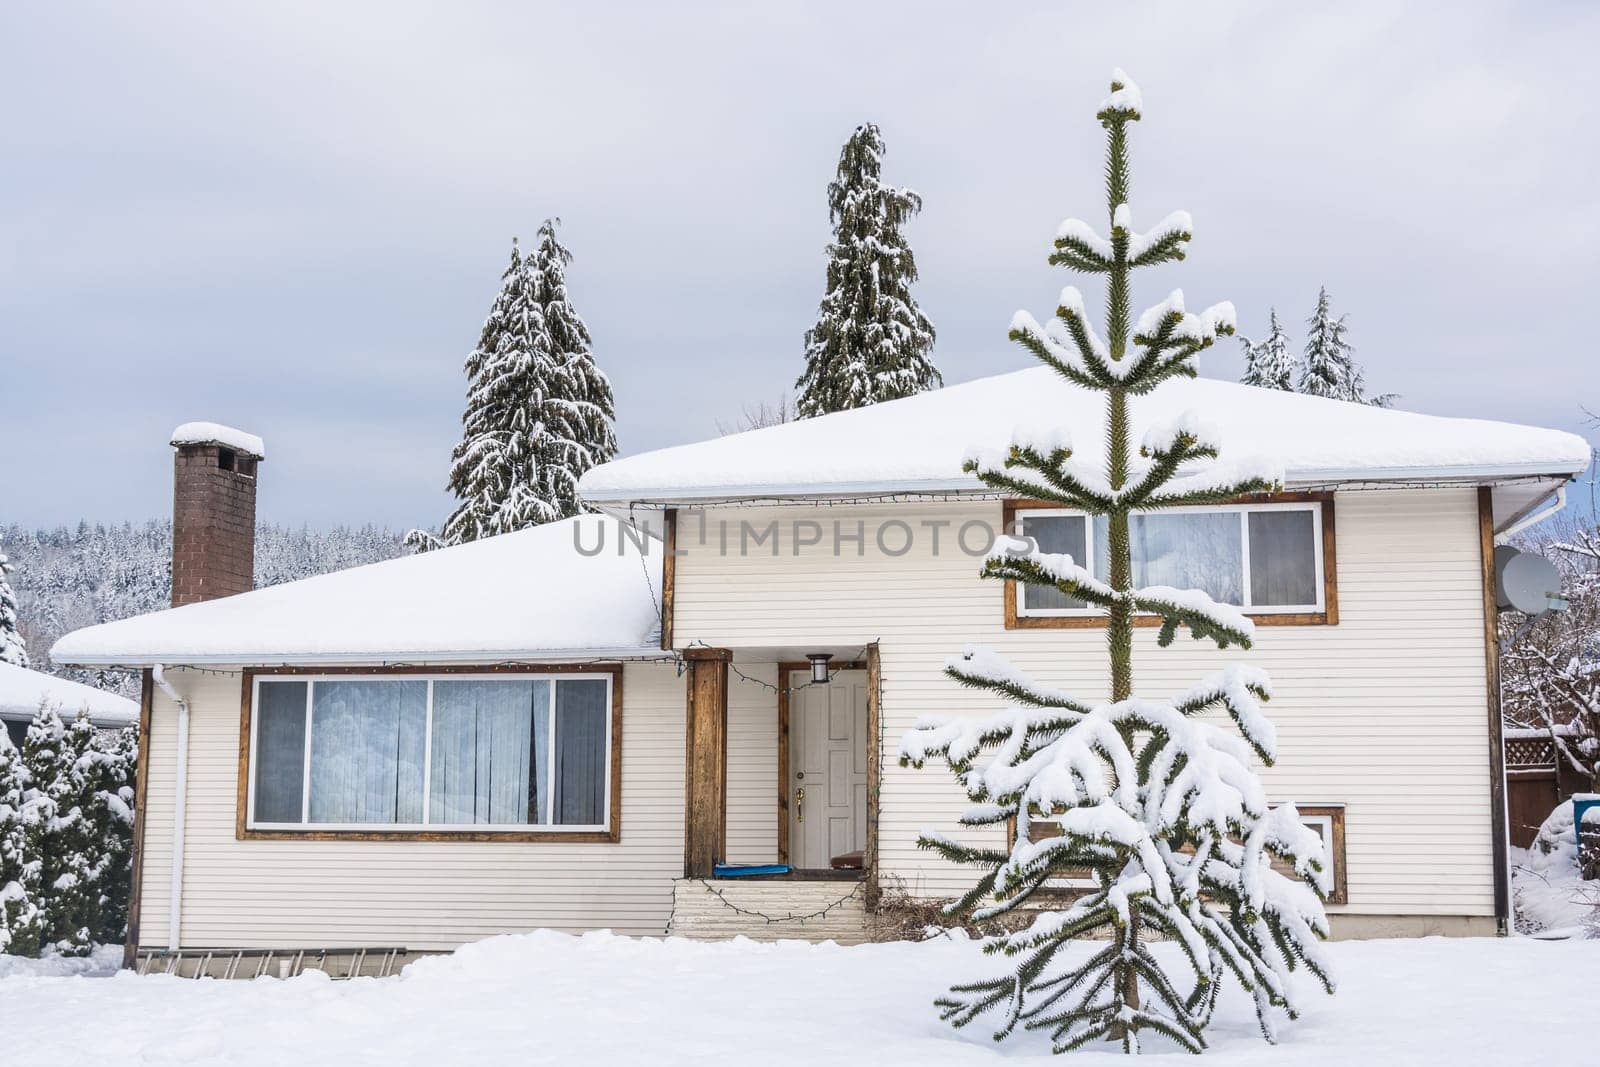 Family house with monkey tree on the front yard in snow. Residential house on winter cloudy day